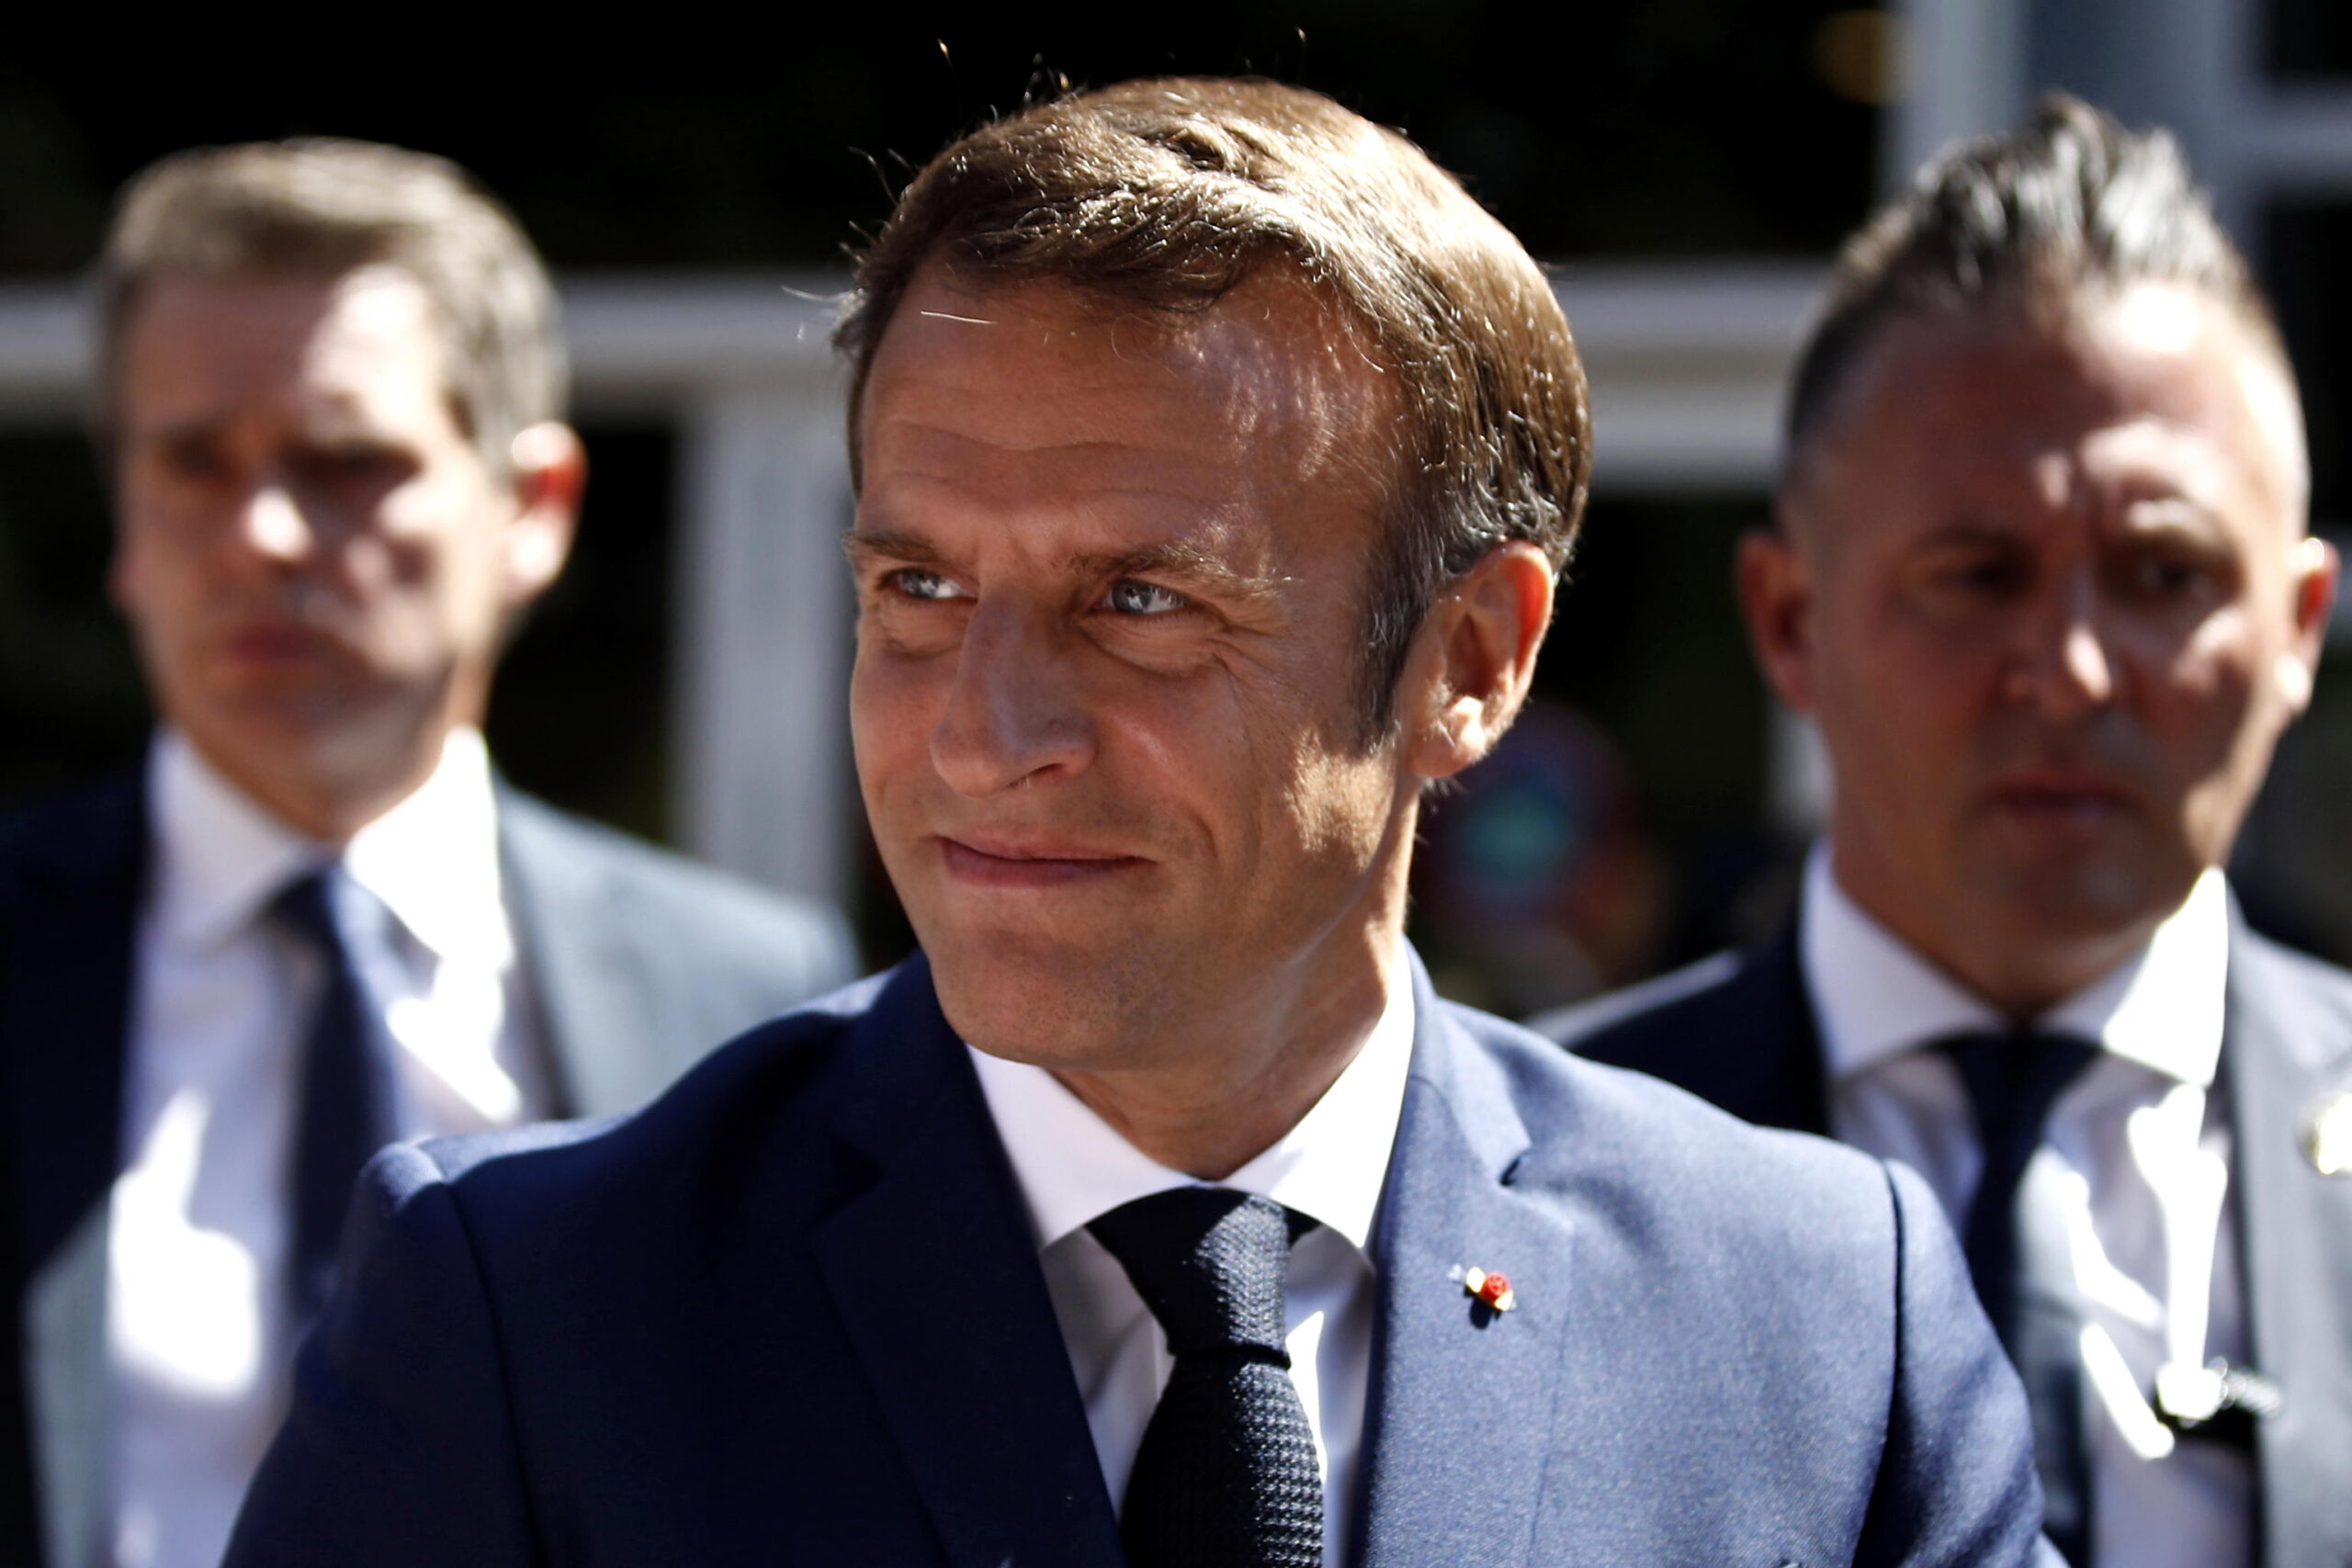 epa10009283 French President Emmanuel Macron arrives to vote in the first round of the French legislatives elections in Le Touquet, Northern France, 12 June 2022. The legislative elections in France will be held on 12 and 19 June 2022 to elect the 577 members for the National Assembly of the French Republic.  EPA/MOHAMMED BADRA